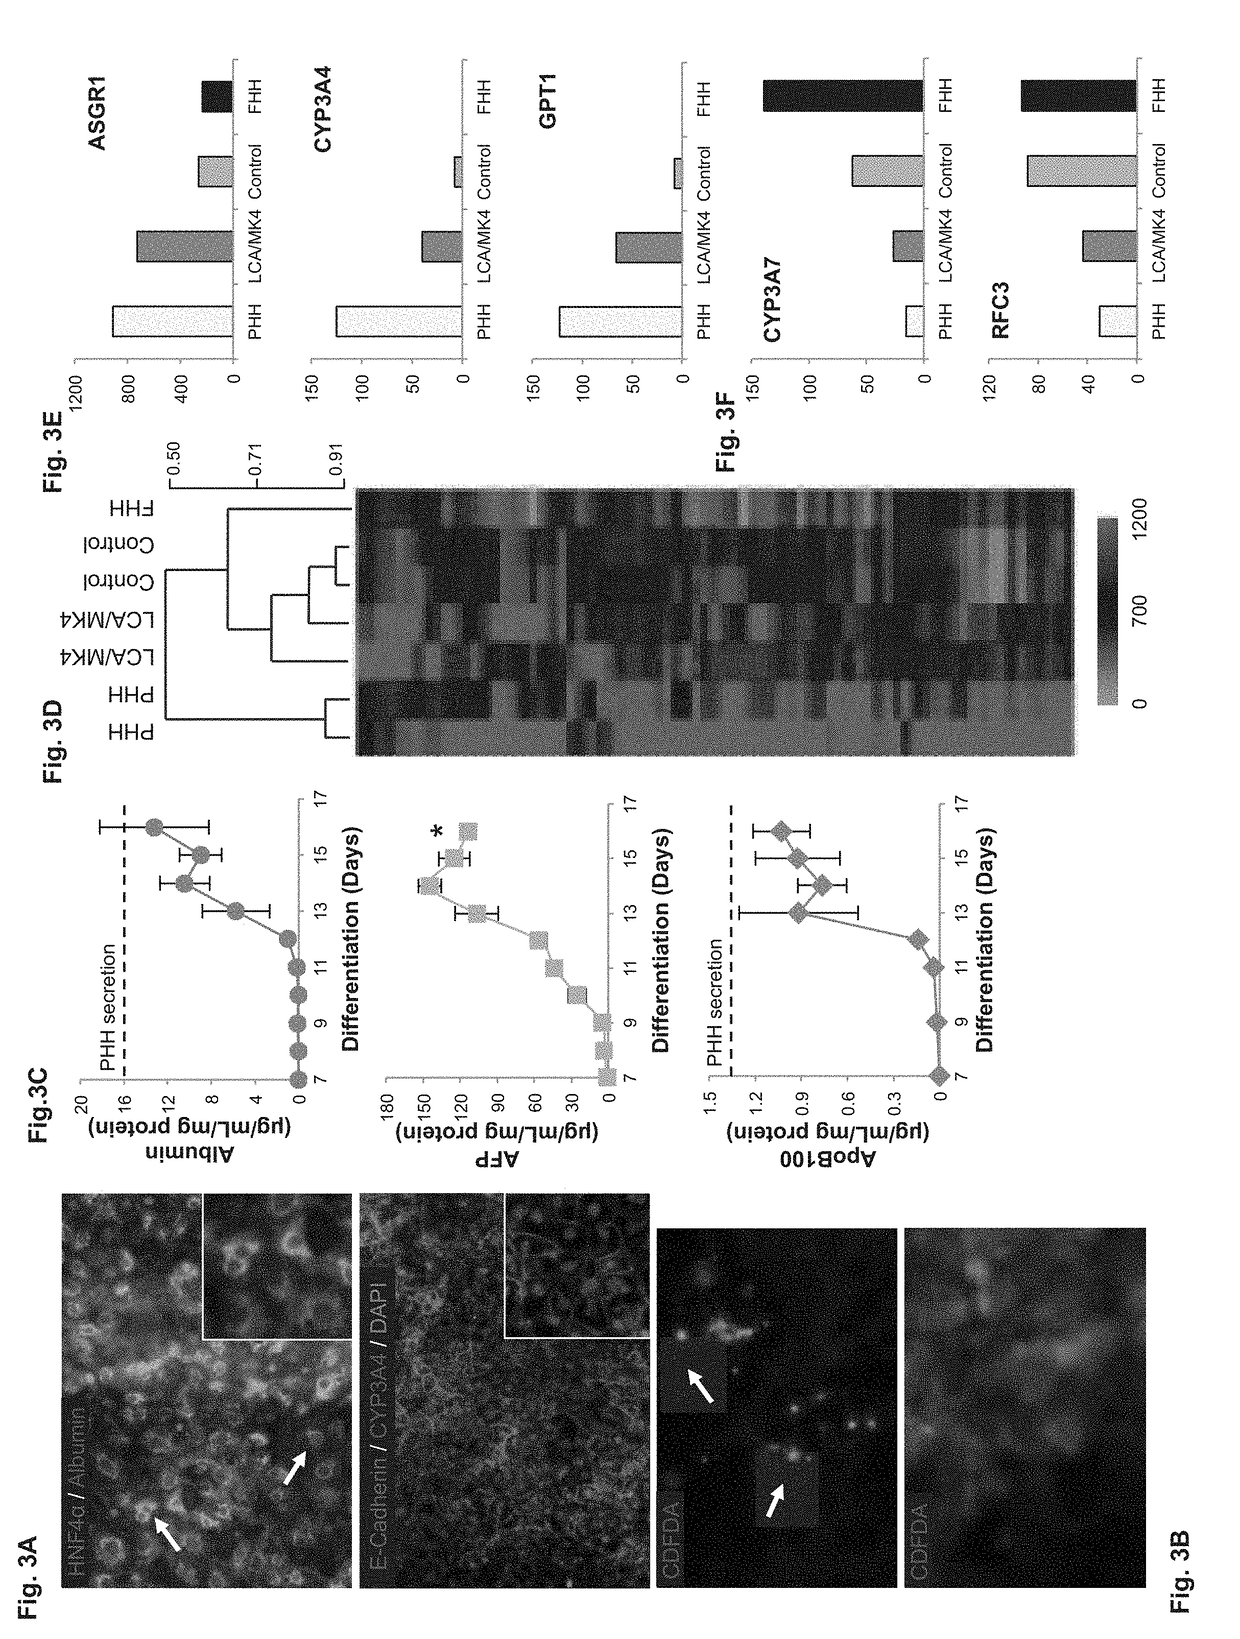 Methods of inducing metabolic maturation of human pluripotent stem cells-derived hepatocytes